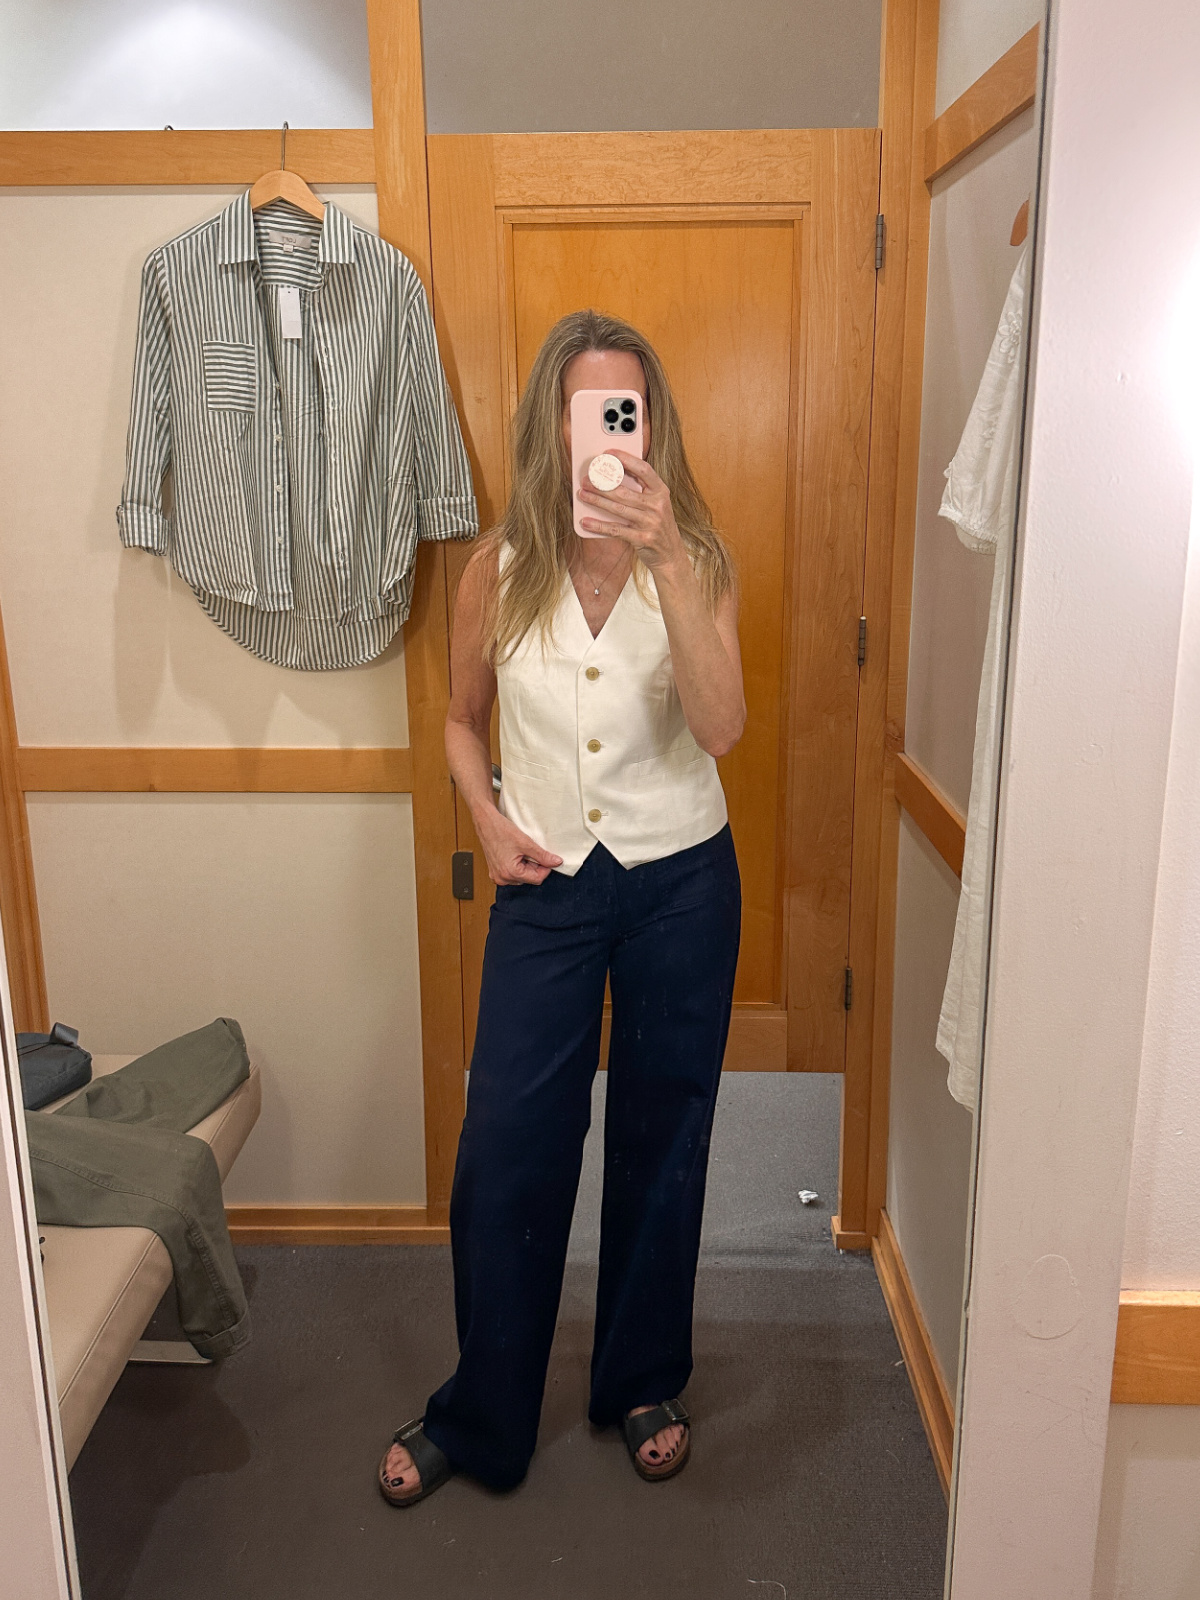 Woman taking dressing room mirror selfie wearing blue pants and white blouse.